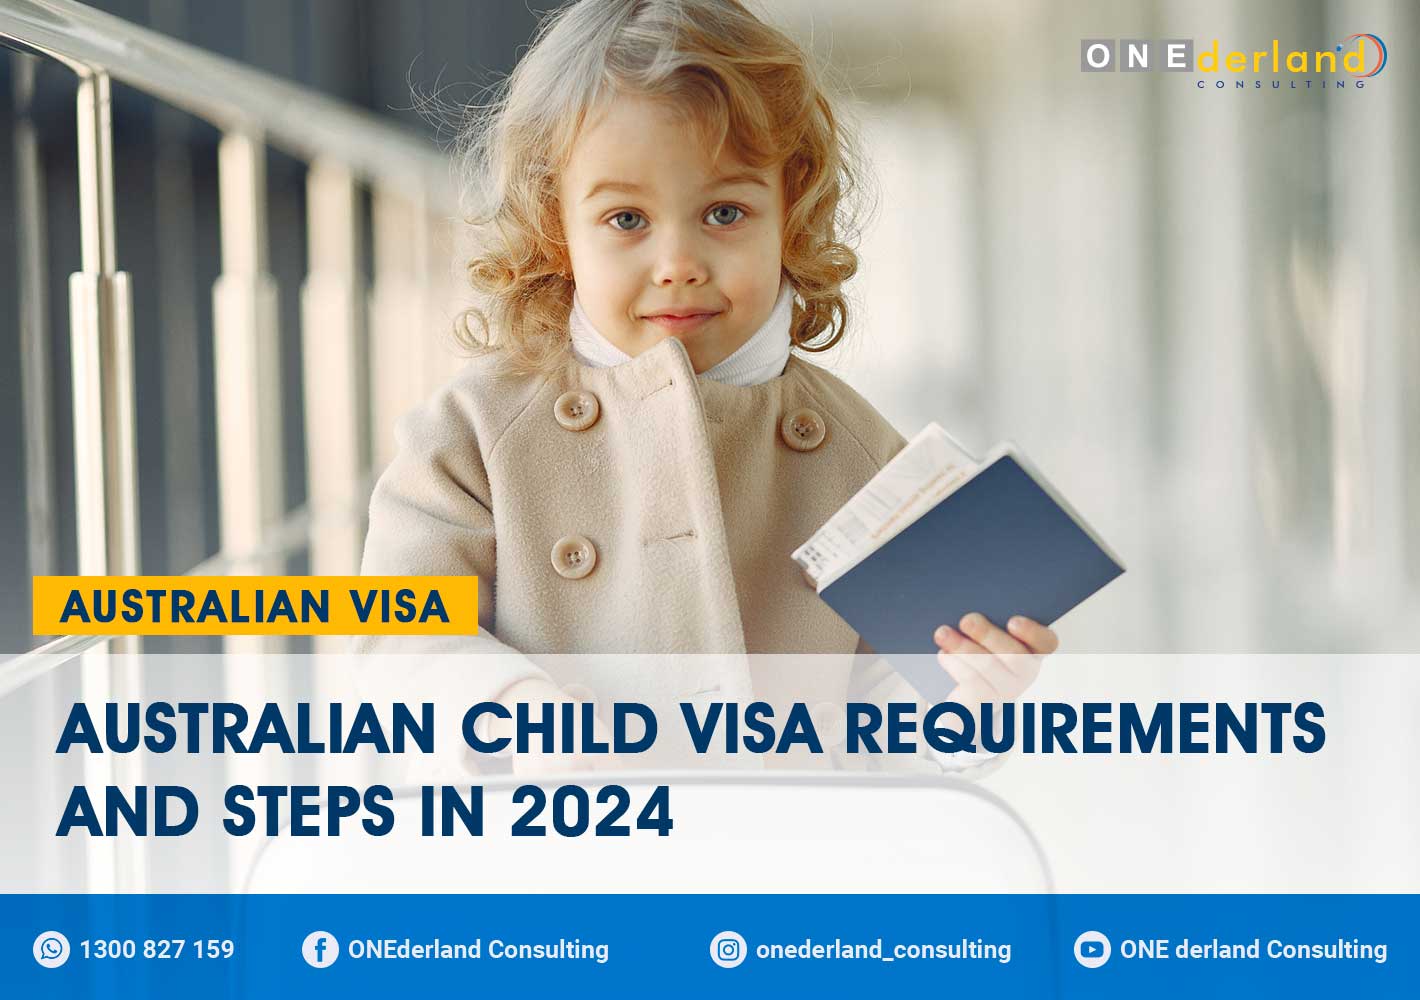 Australian Child Visa Requirements and Steps in 2024